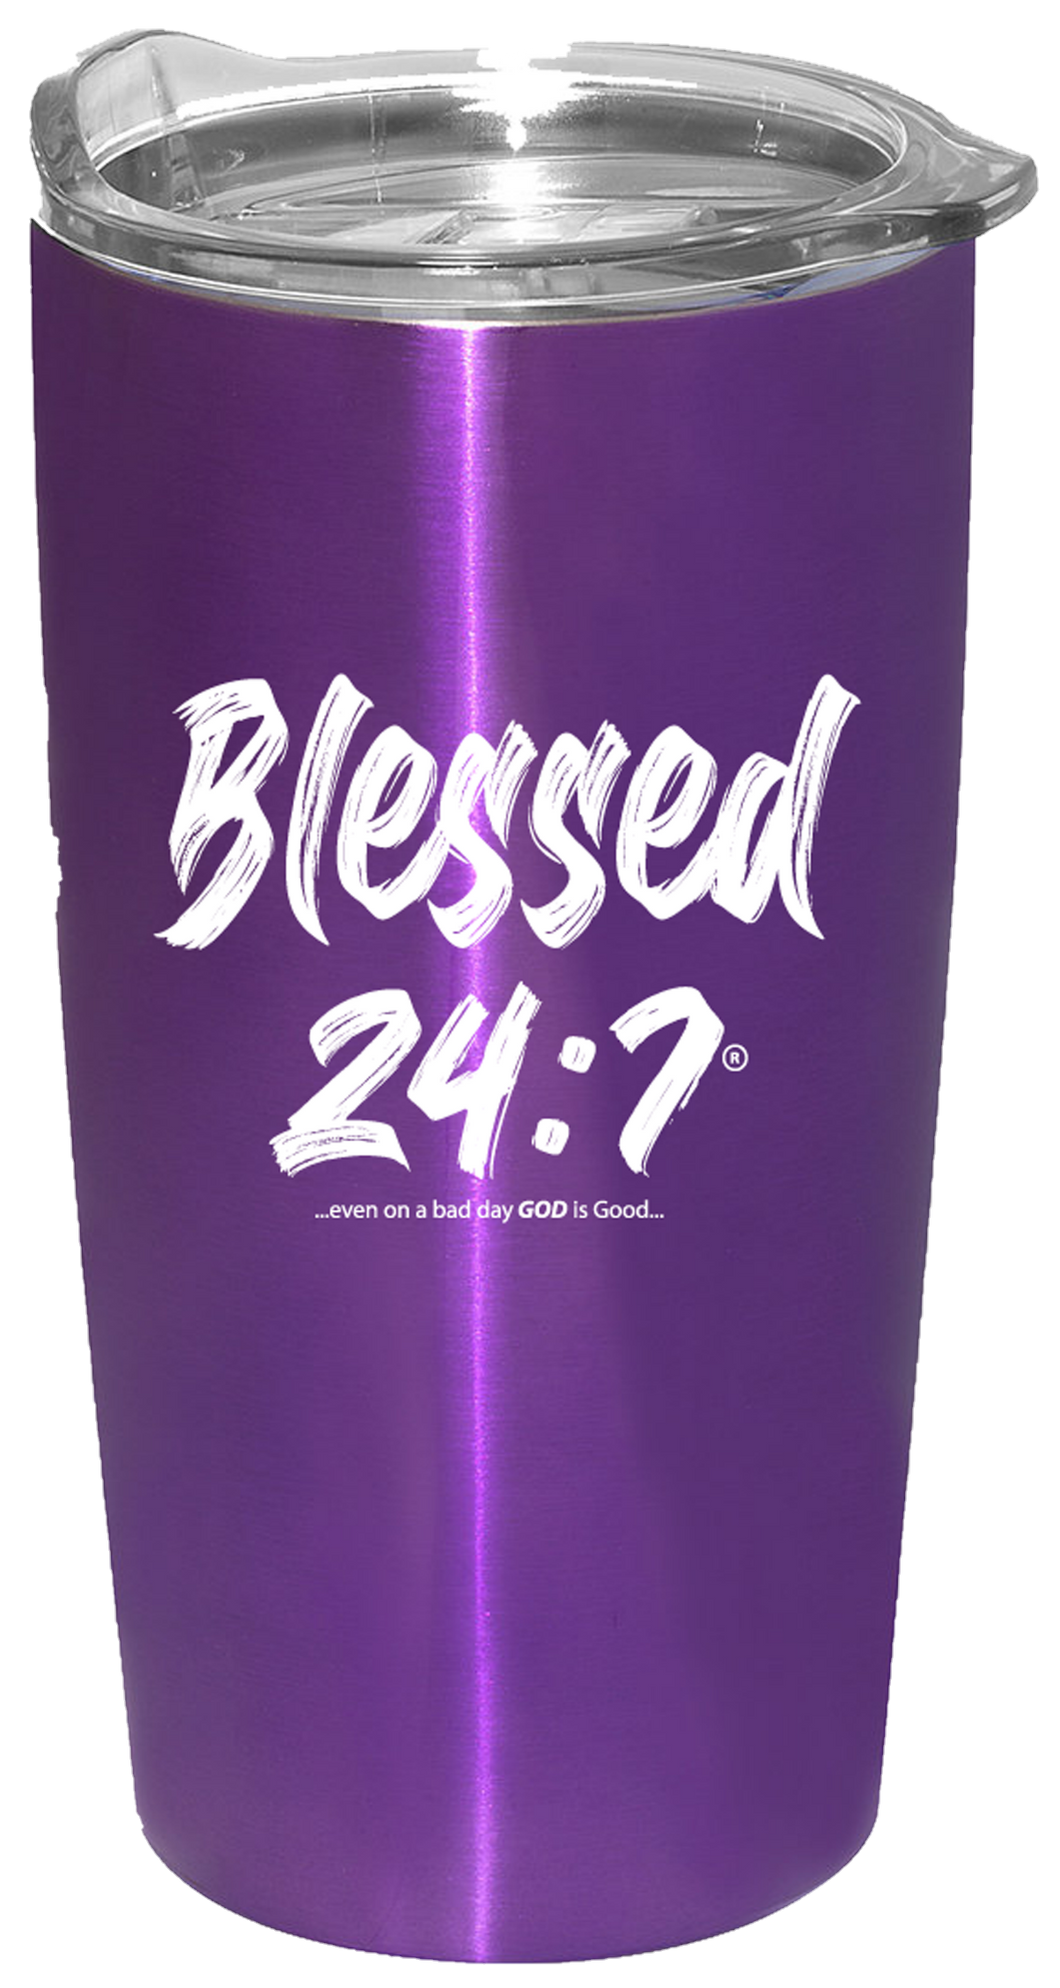 Blessed 24:7 ®️ Tumblers (Insulated Stainless Steel) FREE Shipping